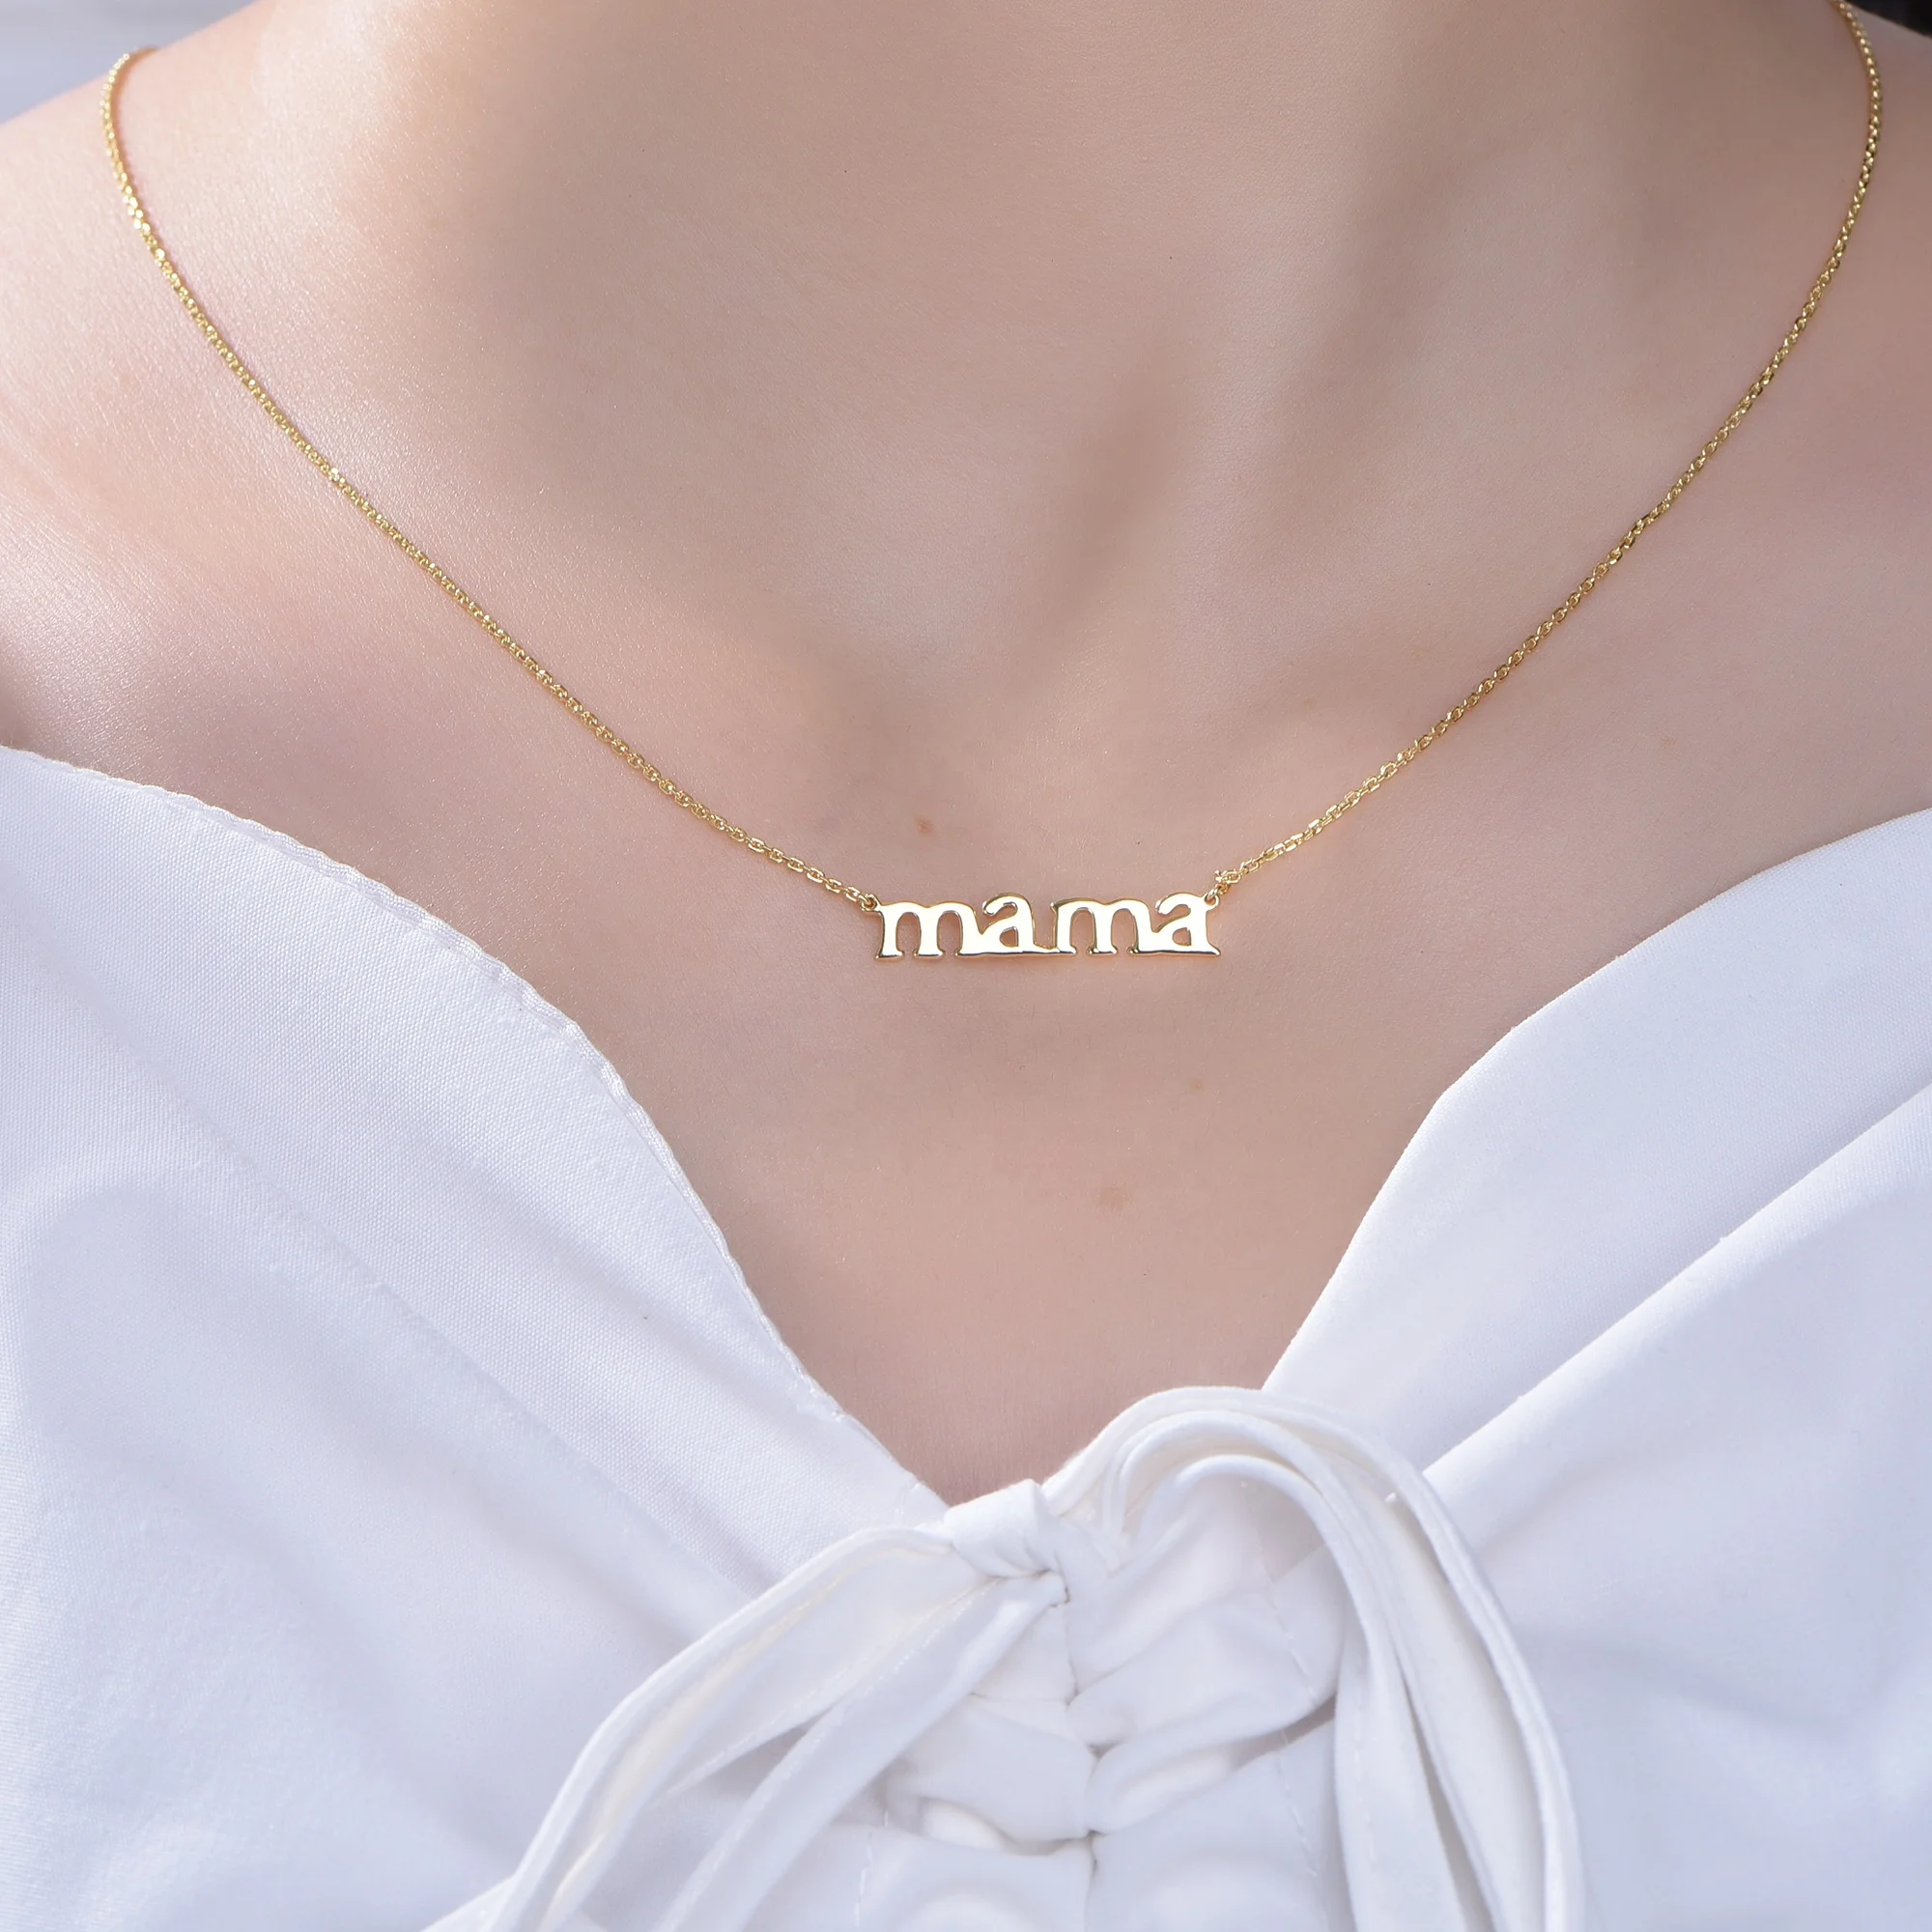 UK mama Necklace 18k Gold Silver 16" 18" Delicate Italian Snake Chain Necklace mama Necklace' Pendant